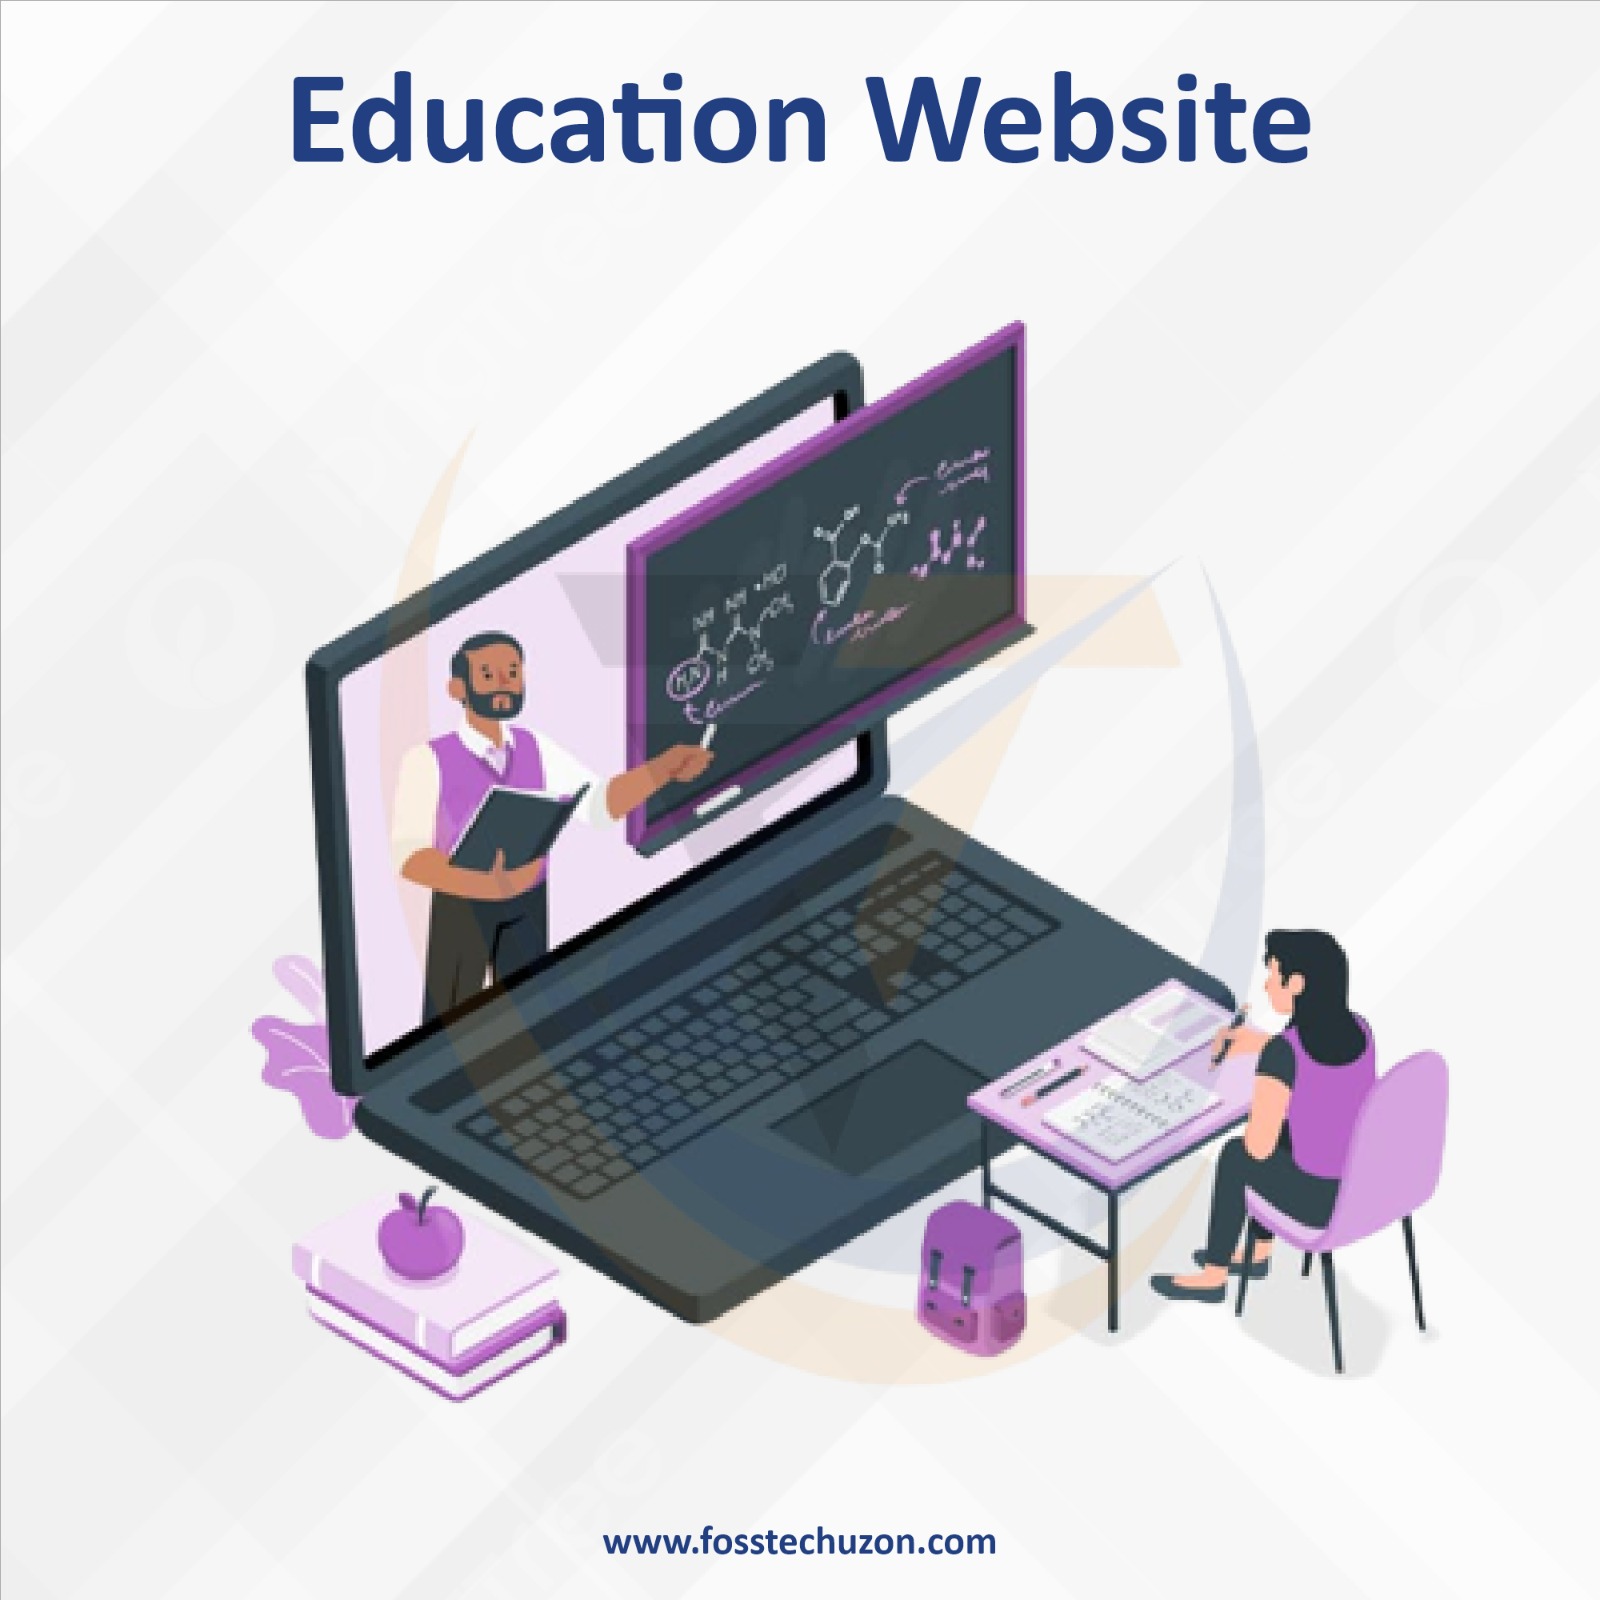  Launch Your Education Website Today! 